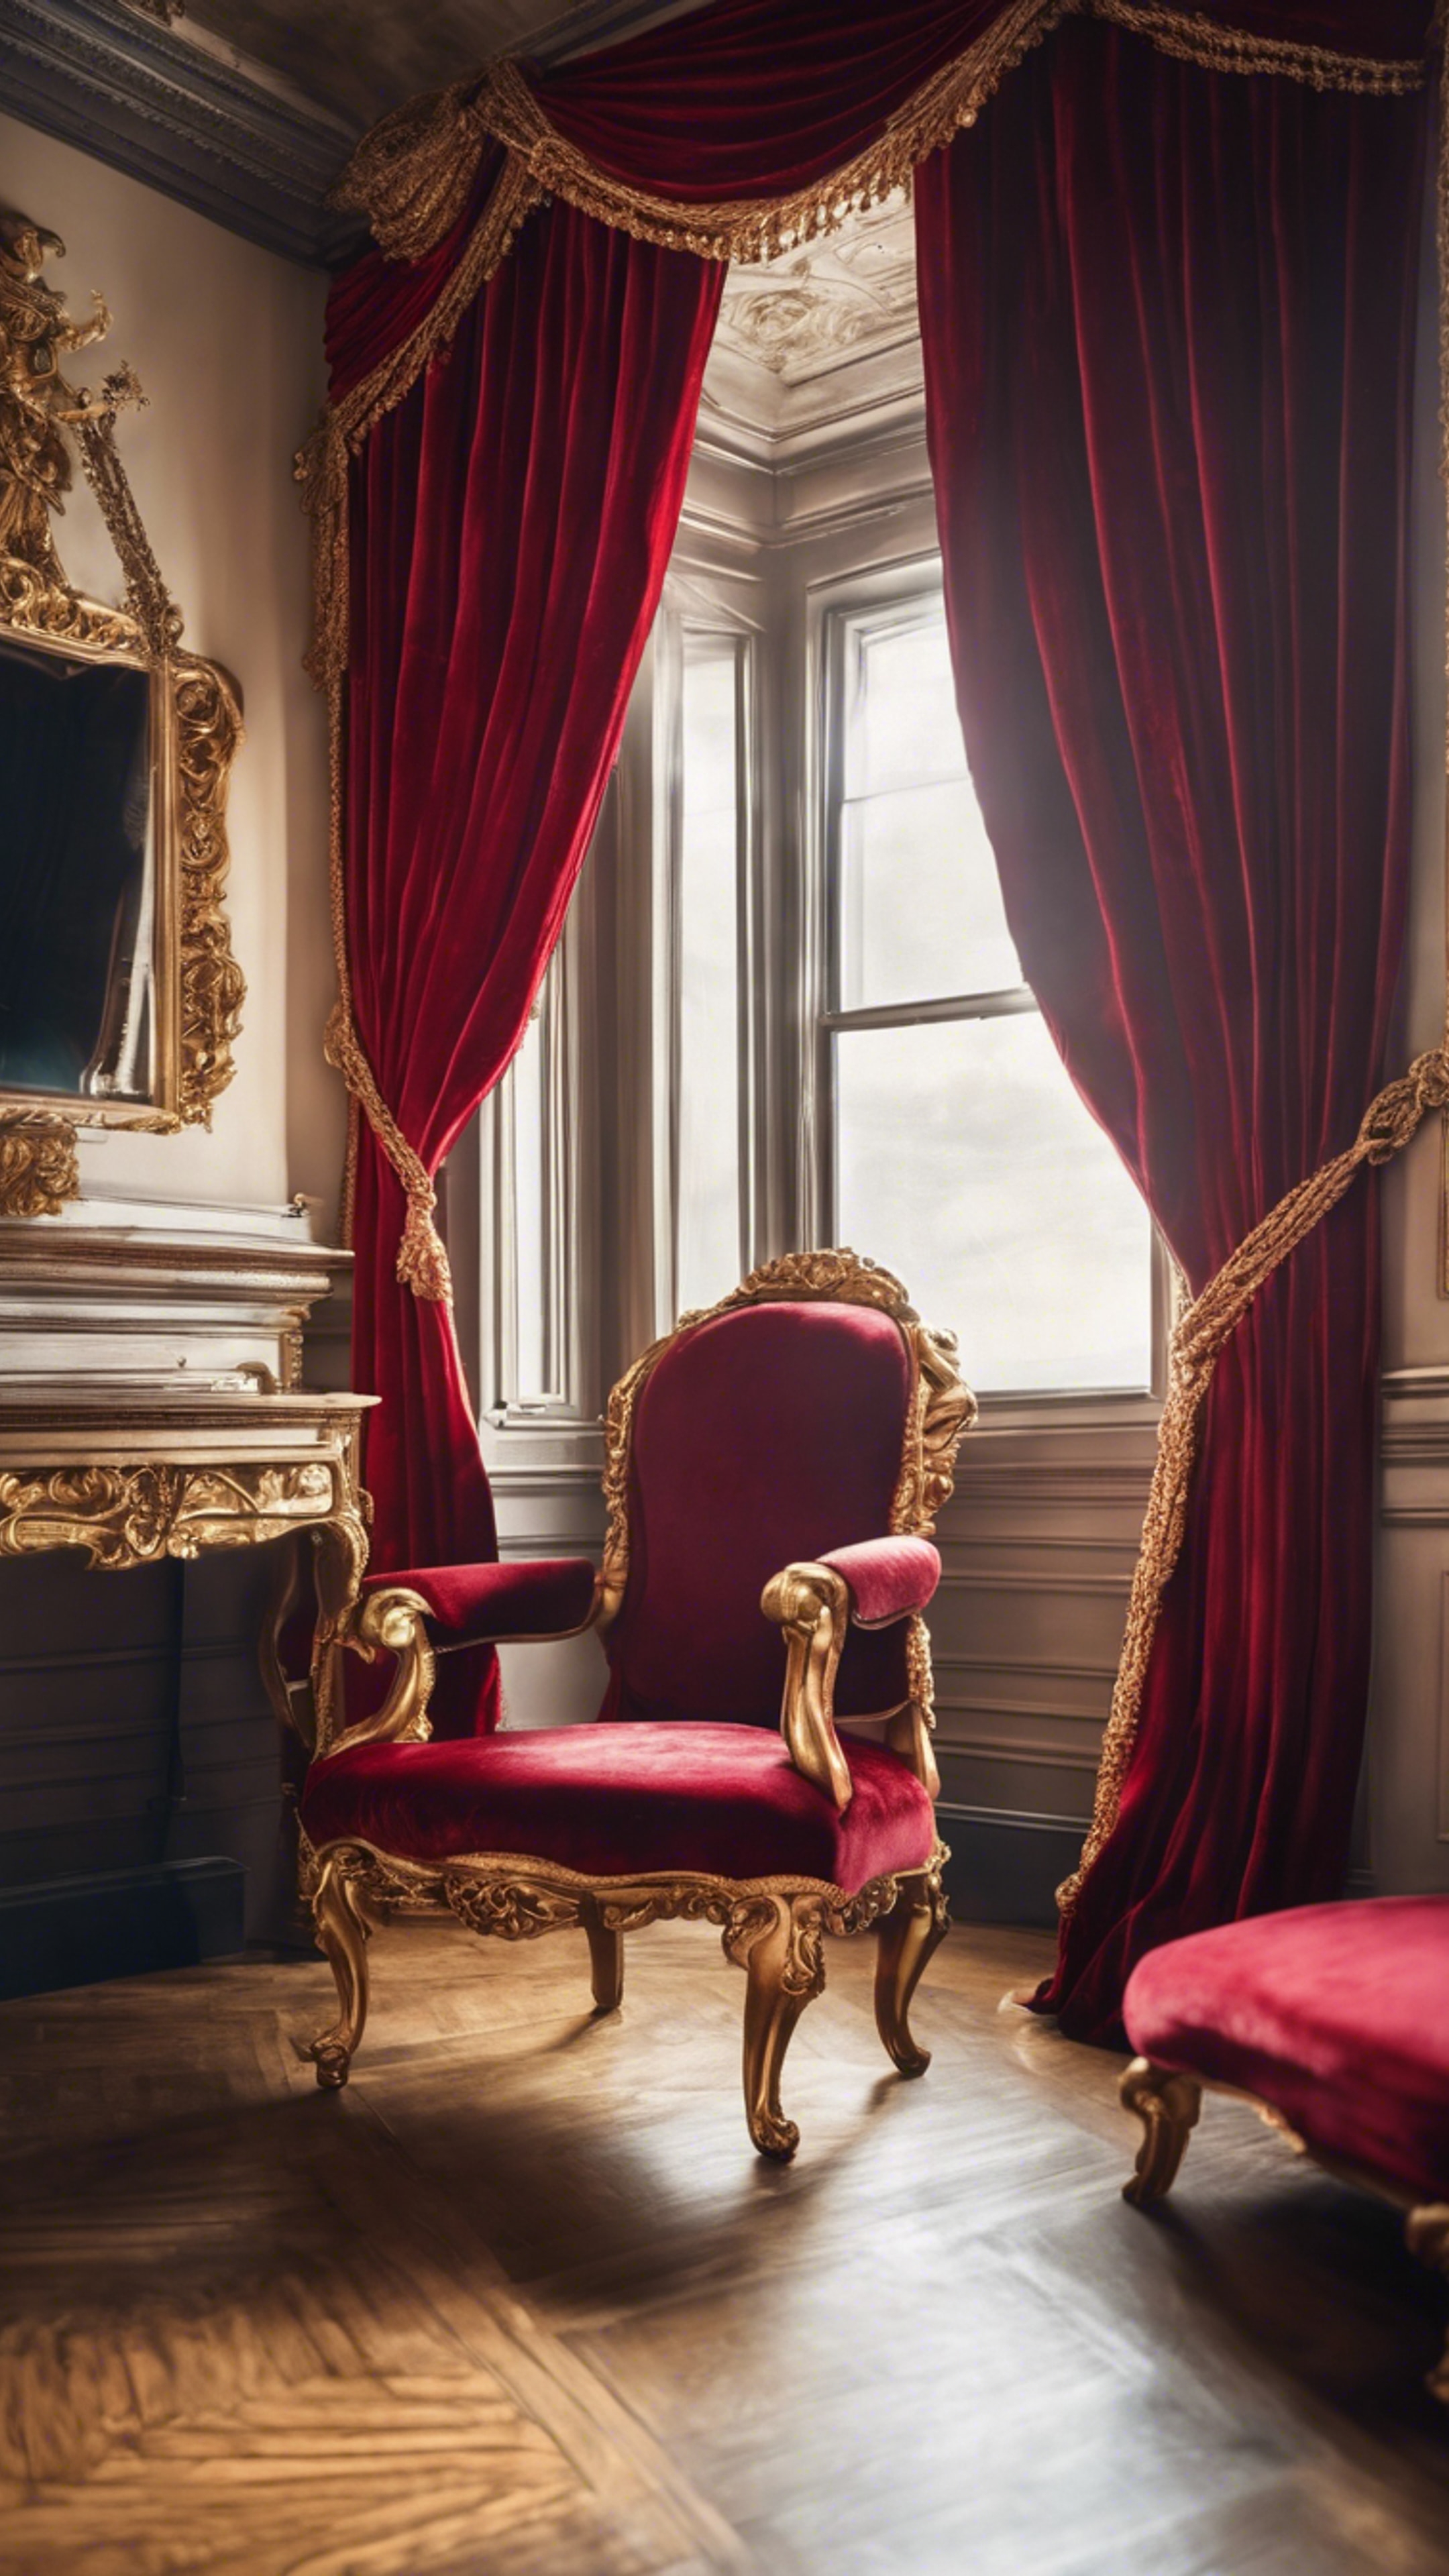 Red velvet drapes tied back with gold ropes in a grand victorian-style living room. Wallpaper[6c8dd2a9b4f74c0eb869]